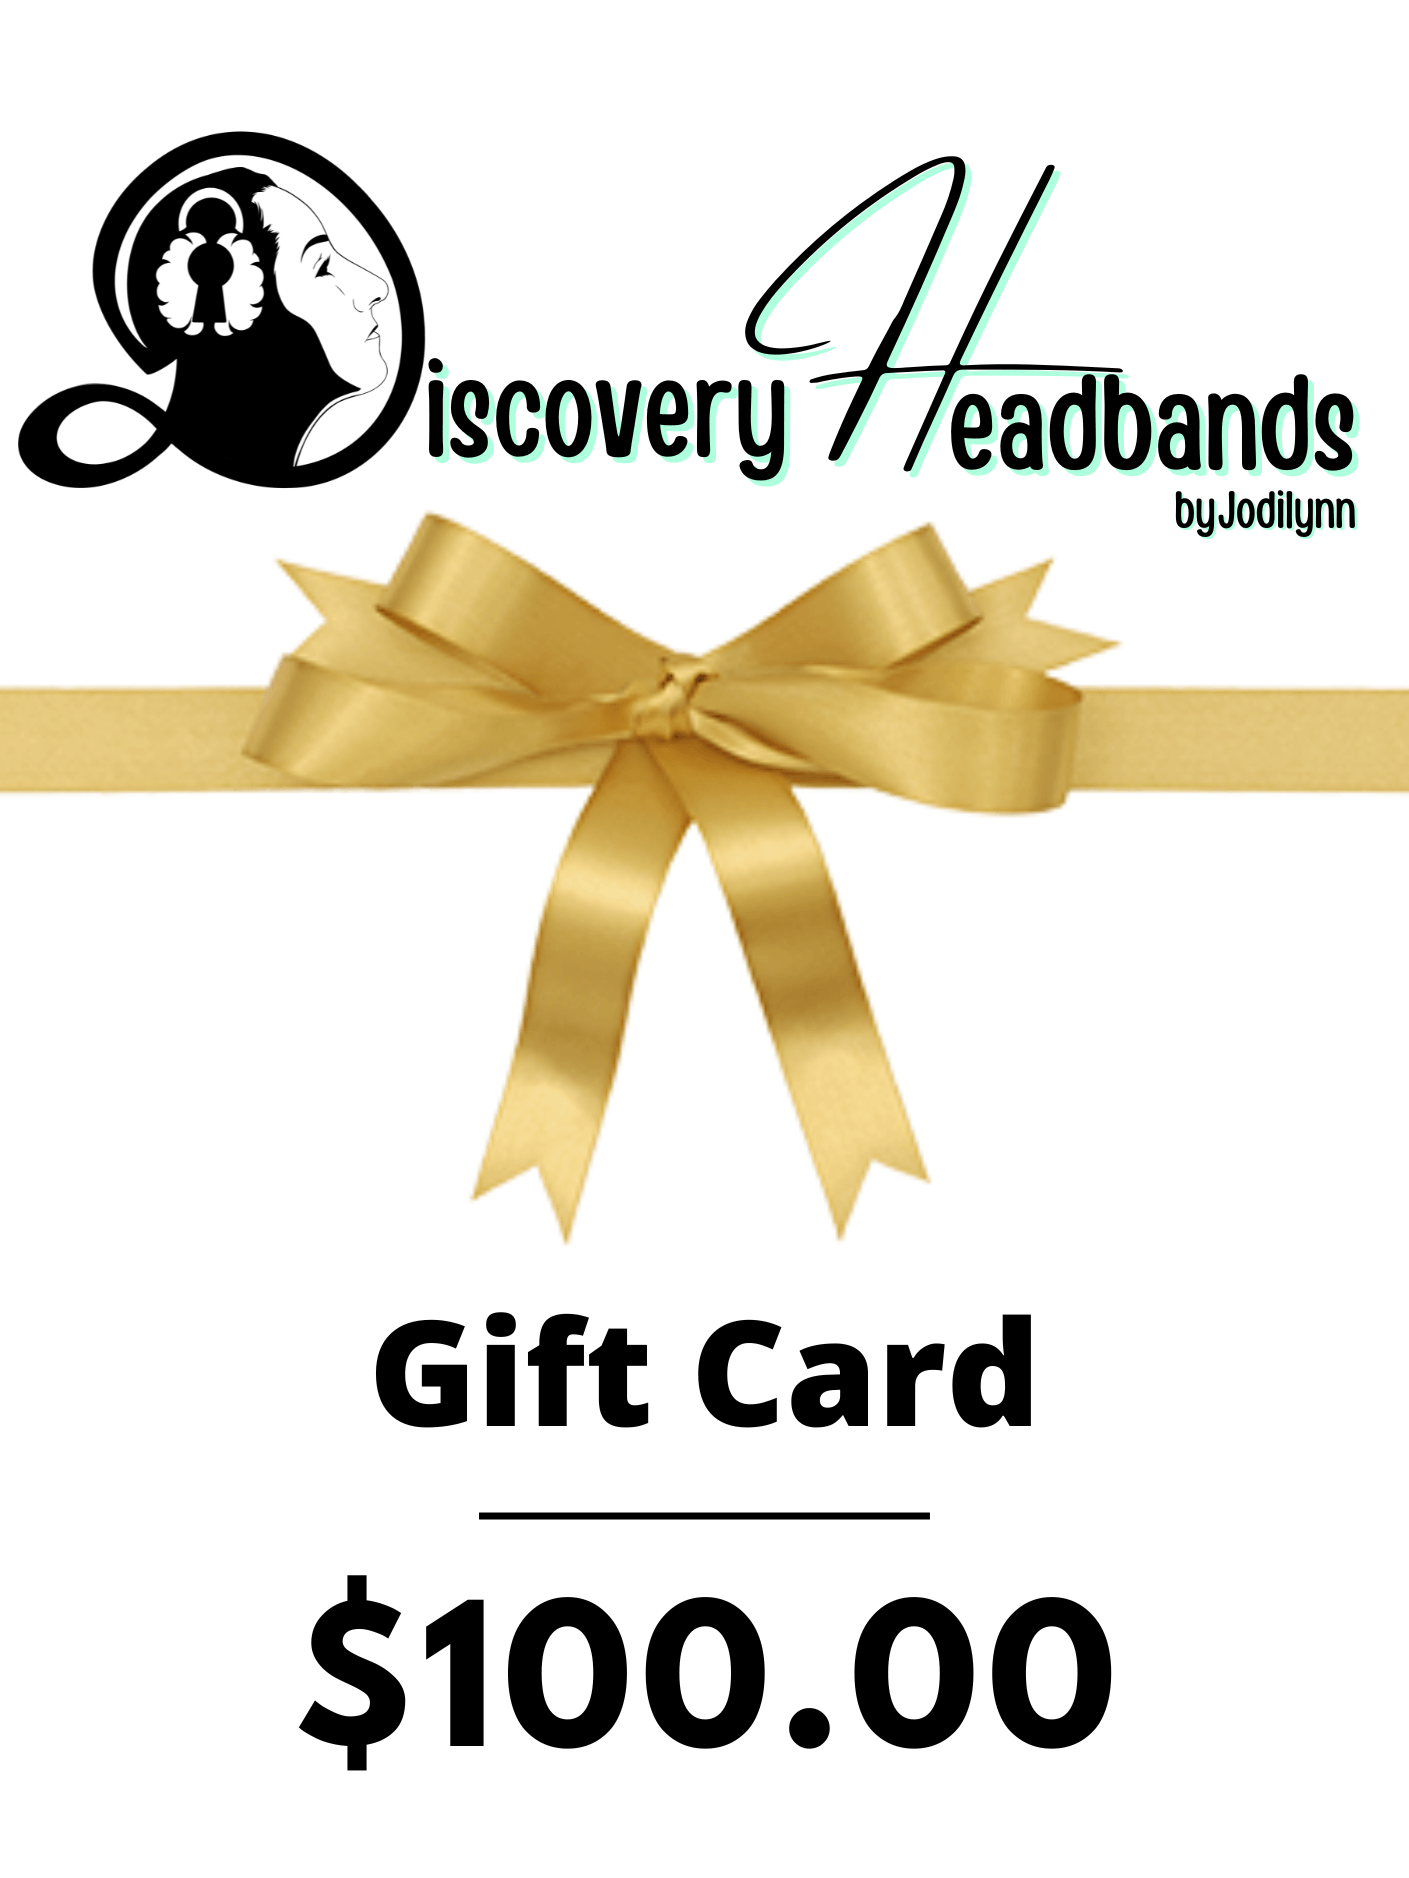 Discovery Headbands Gift Cards